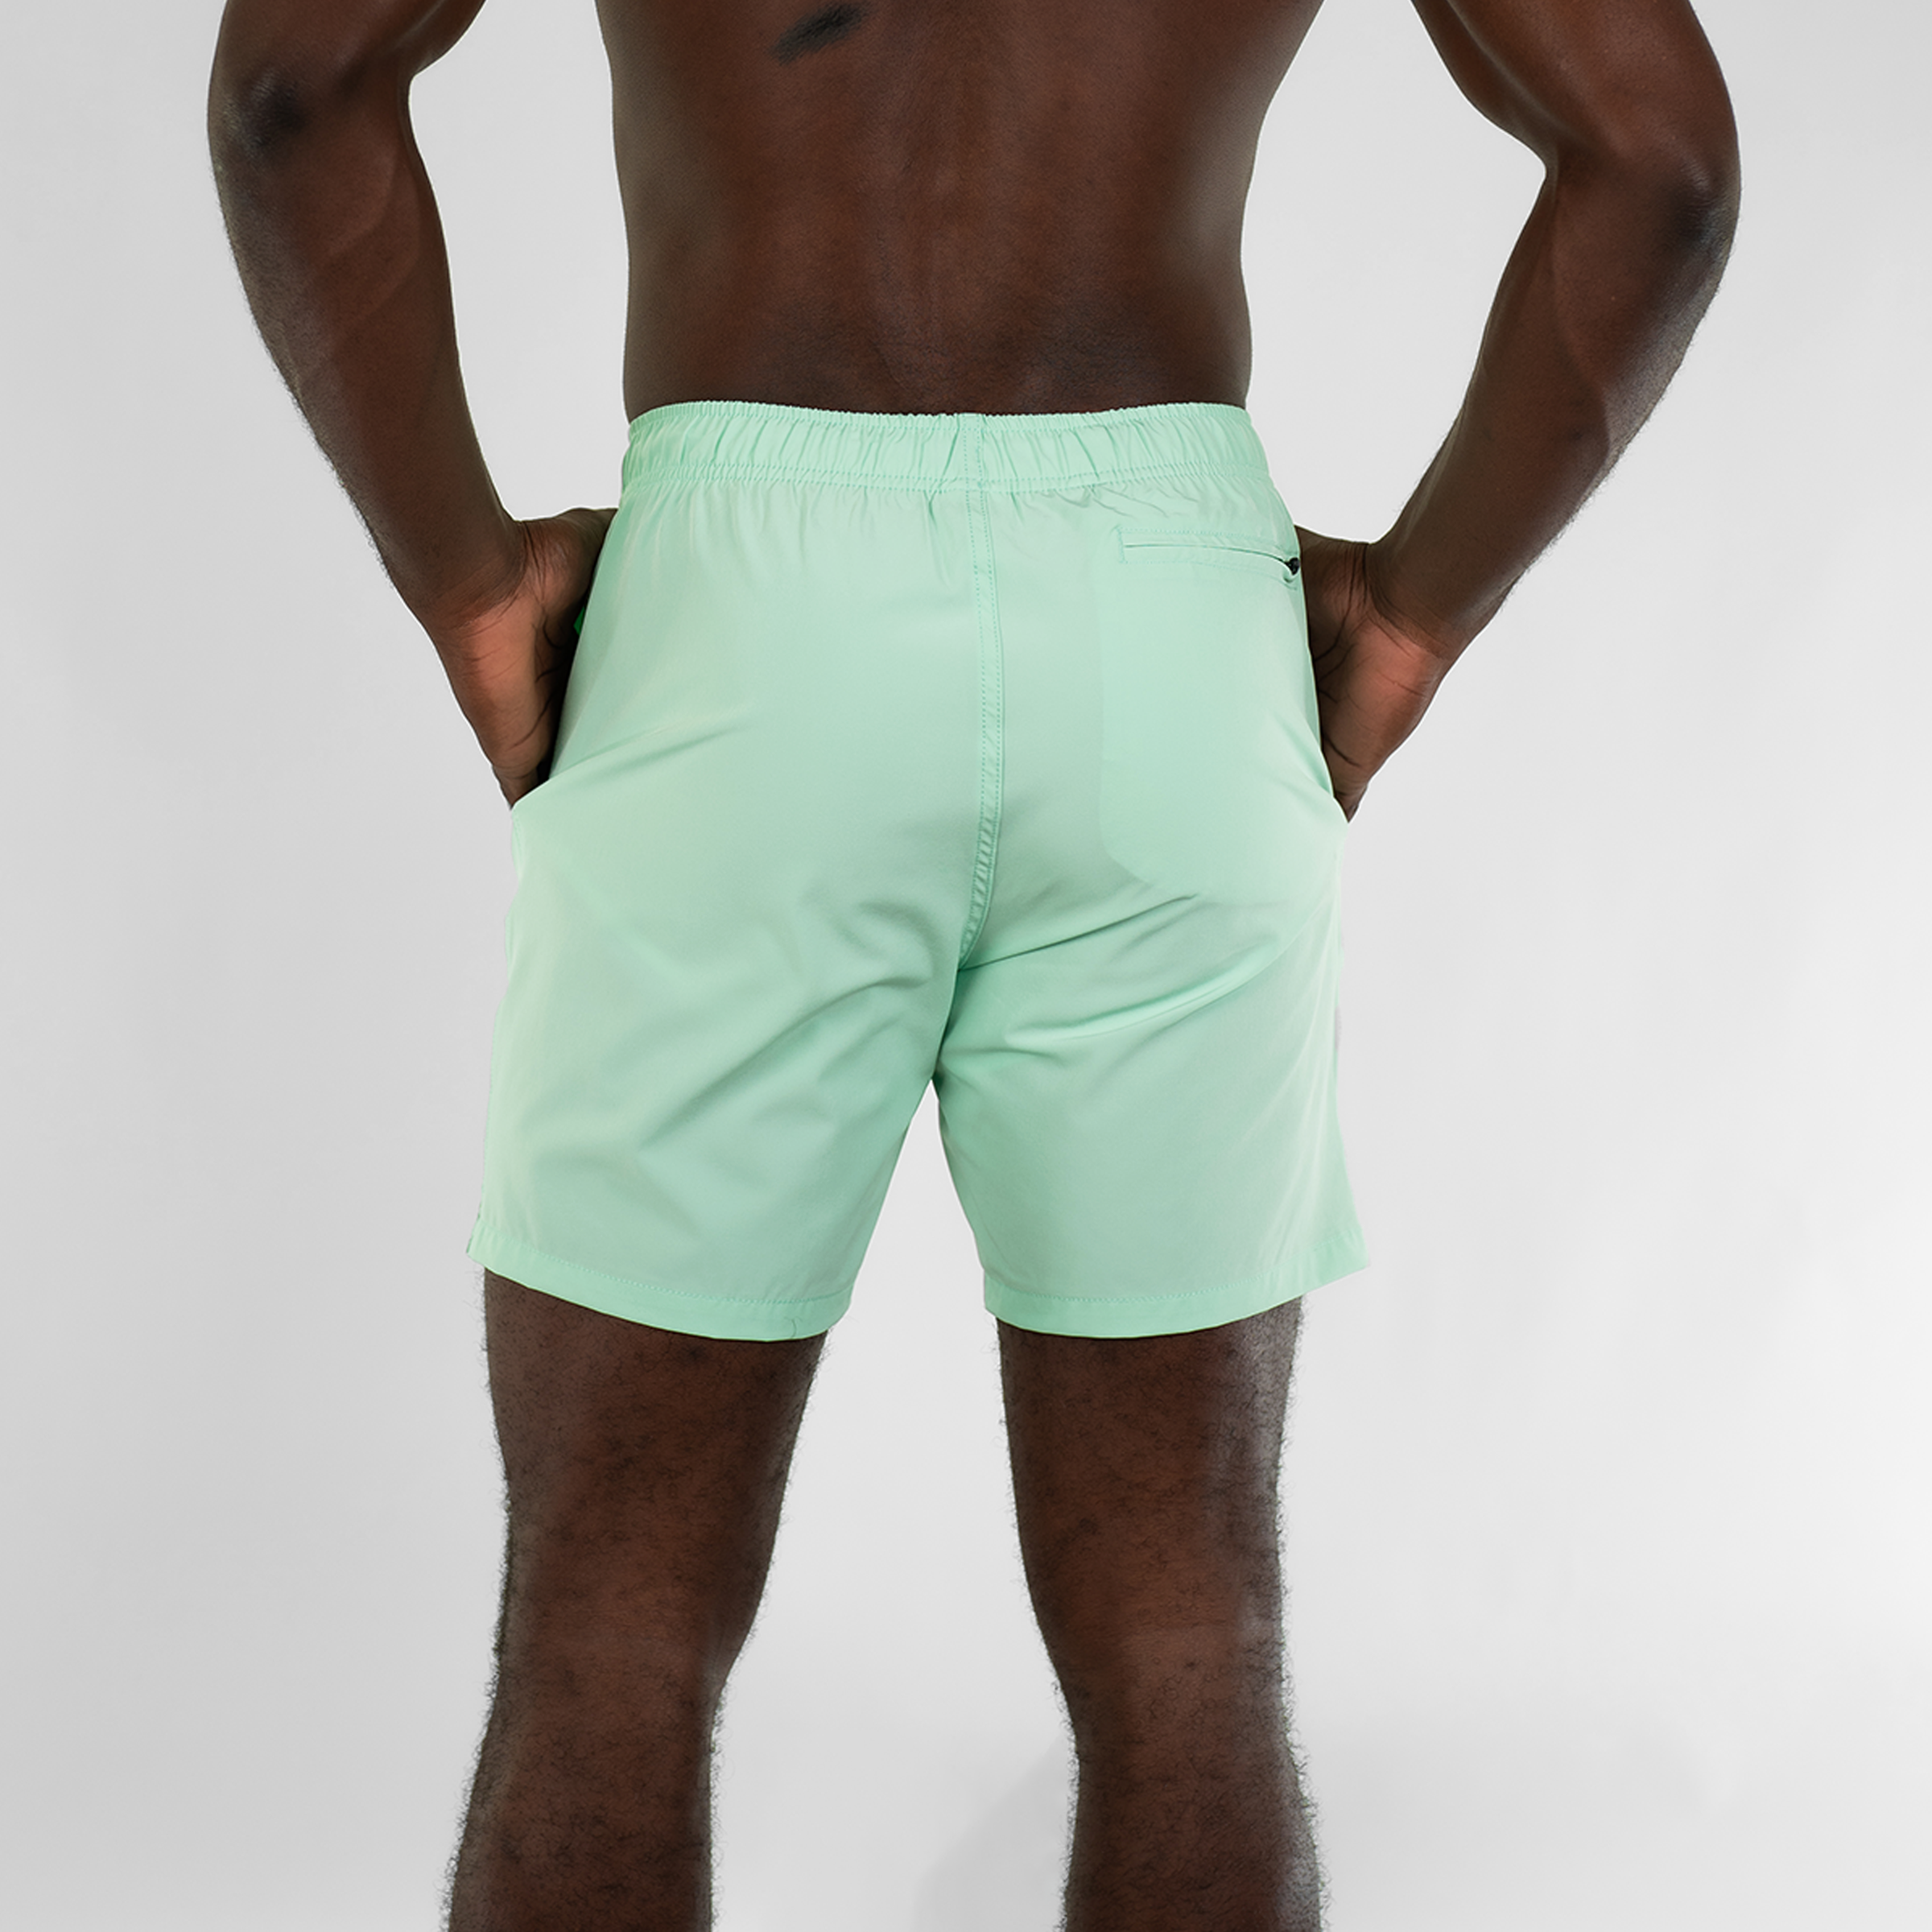 Stretch Swim 7" in Mint back on model with hands in inseam pockets